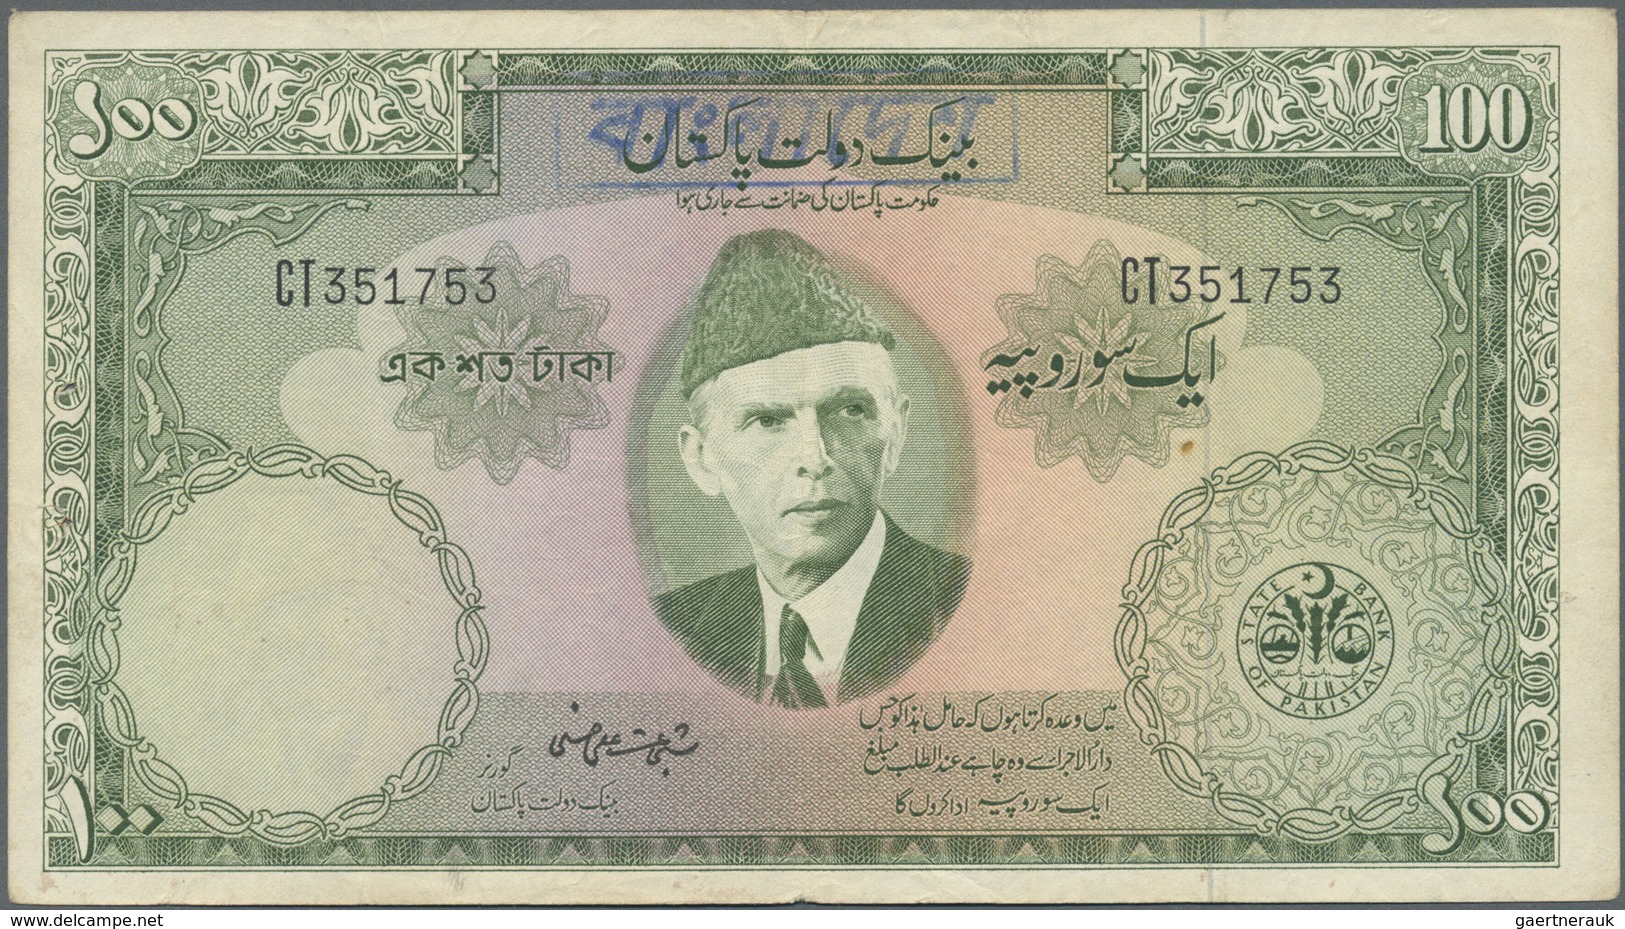 Bangladesh: Rare Note Of 100 Rupees Pakistan With Stamp "Bangladesh" On Front Side P. 3D, Used With - Bangladesh